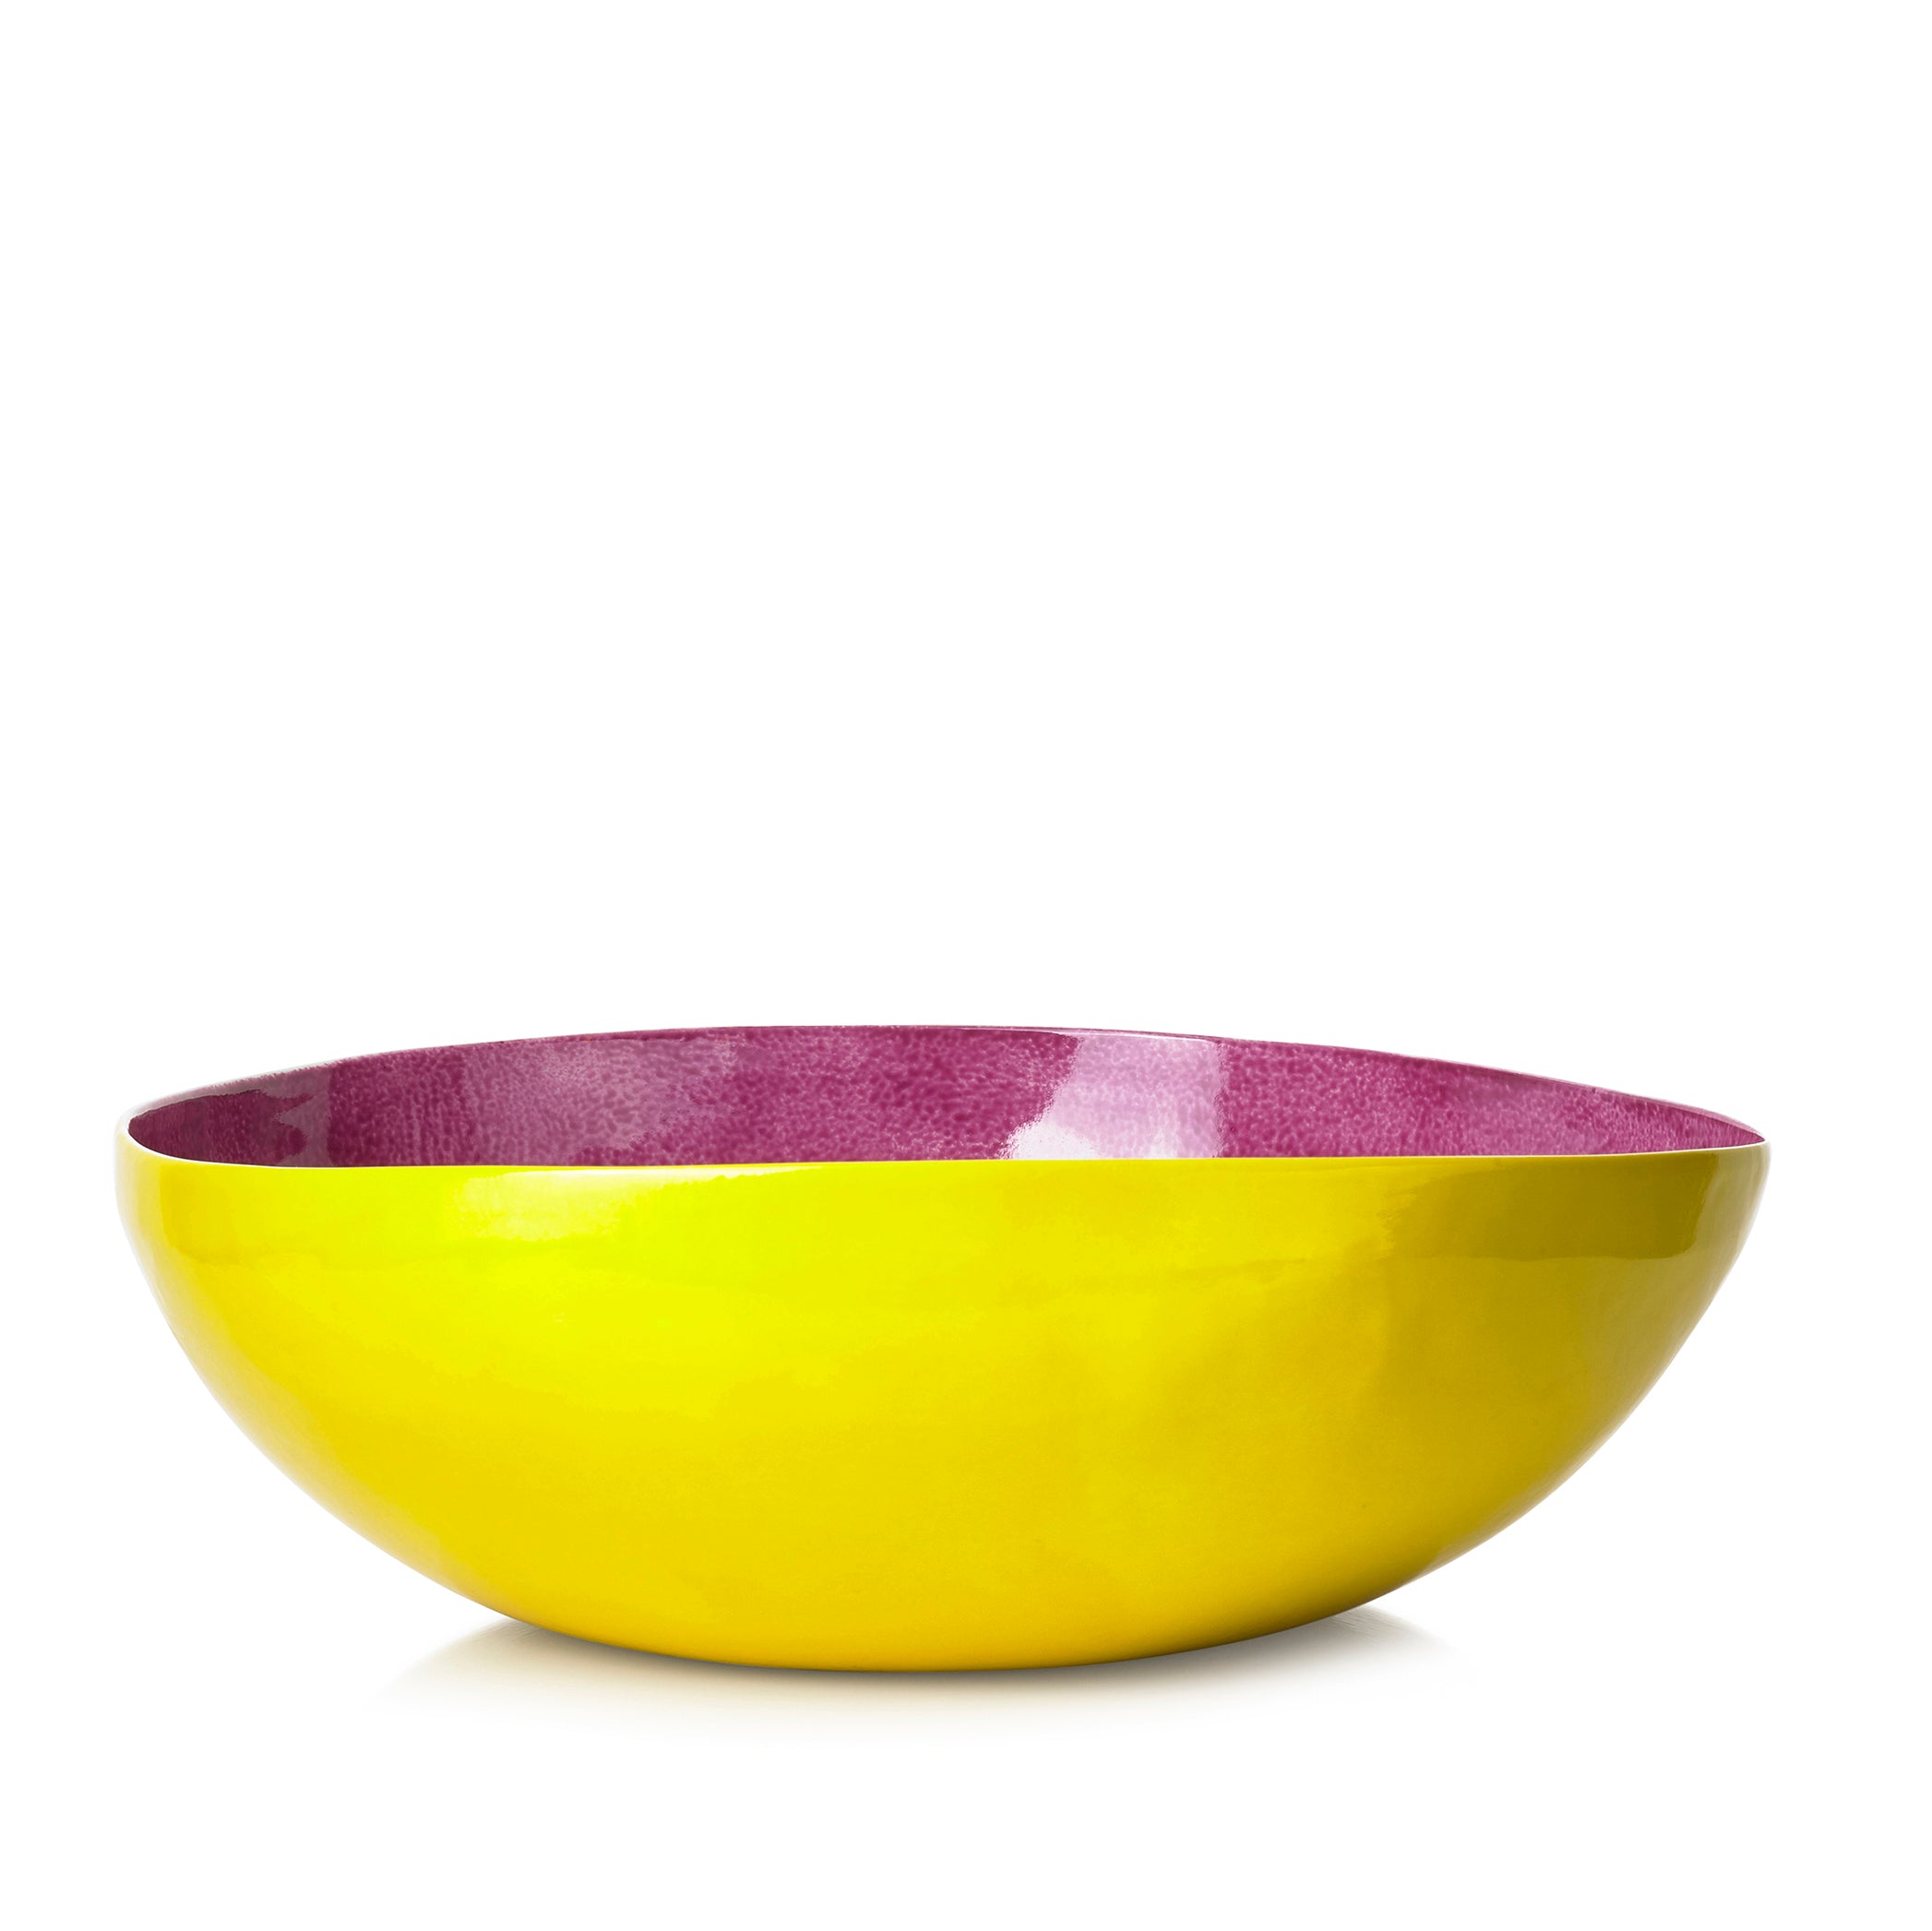 Summerill & Bishop Handmade 30cm Porcelain Medium Salad Bowl in Two Tone Pink and Yellow